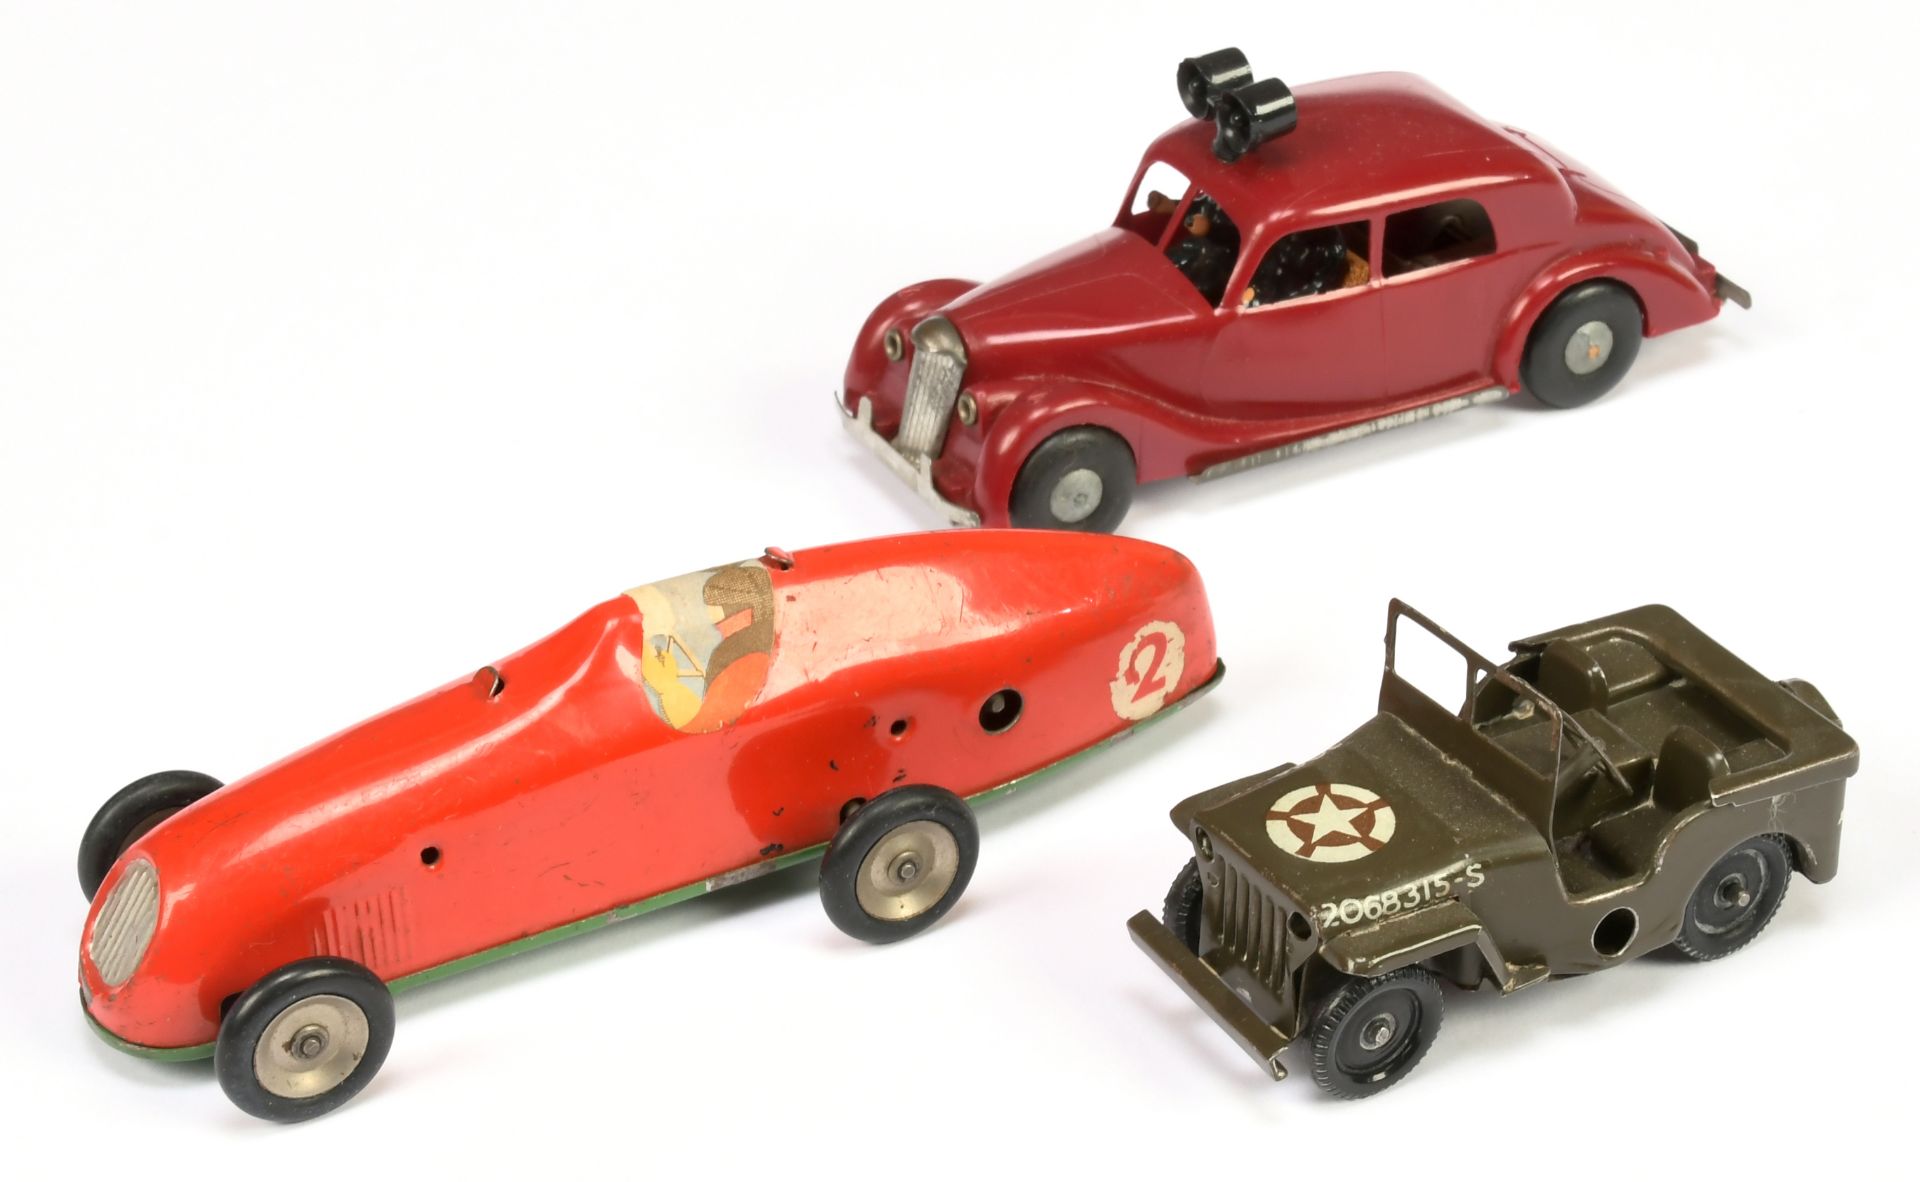 Triang Minic Clockwork Group Of 3 To Include - (1) 13M Racing Car Red body driver (label), (2) 78...